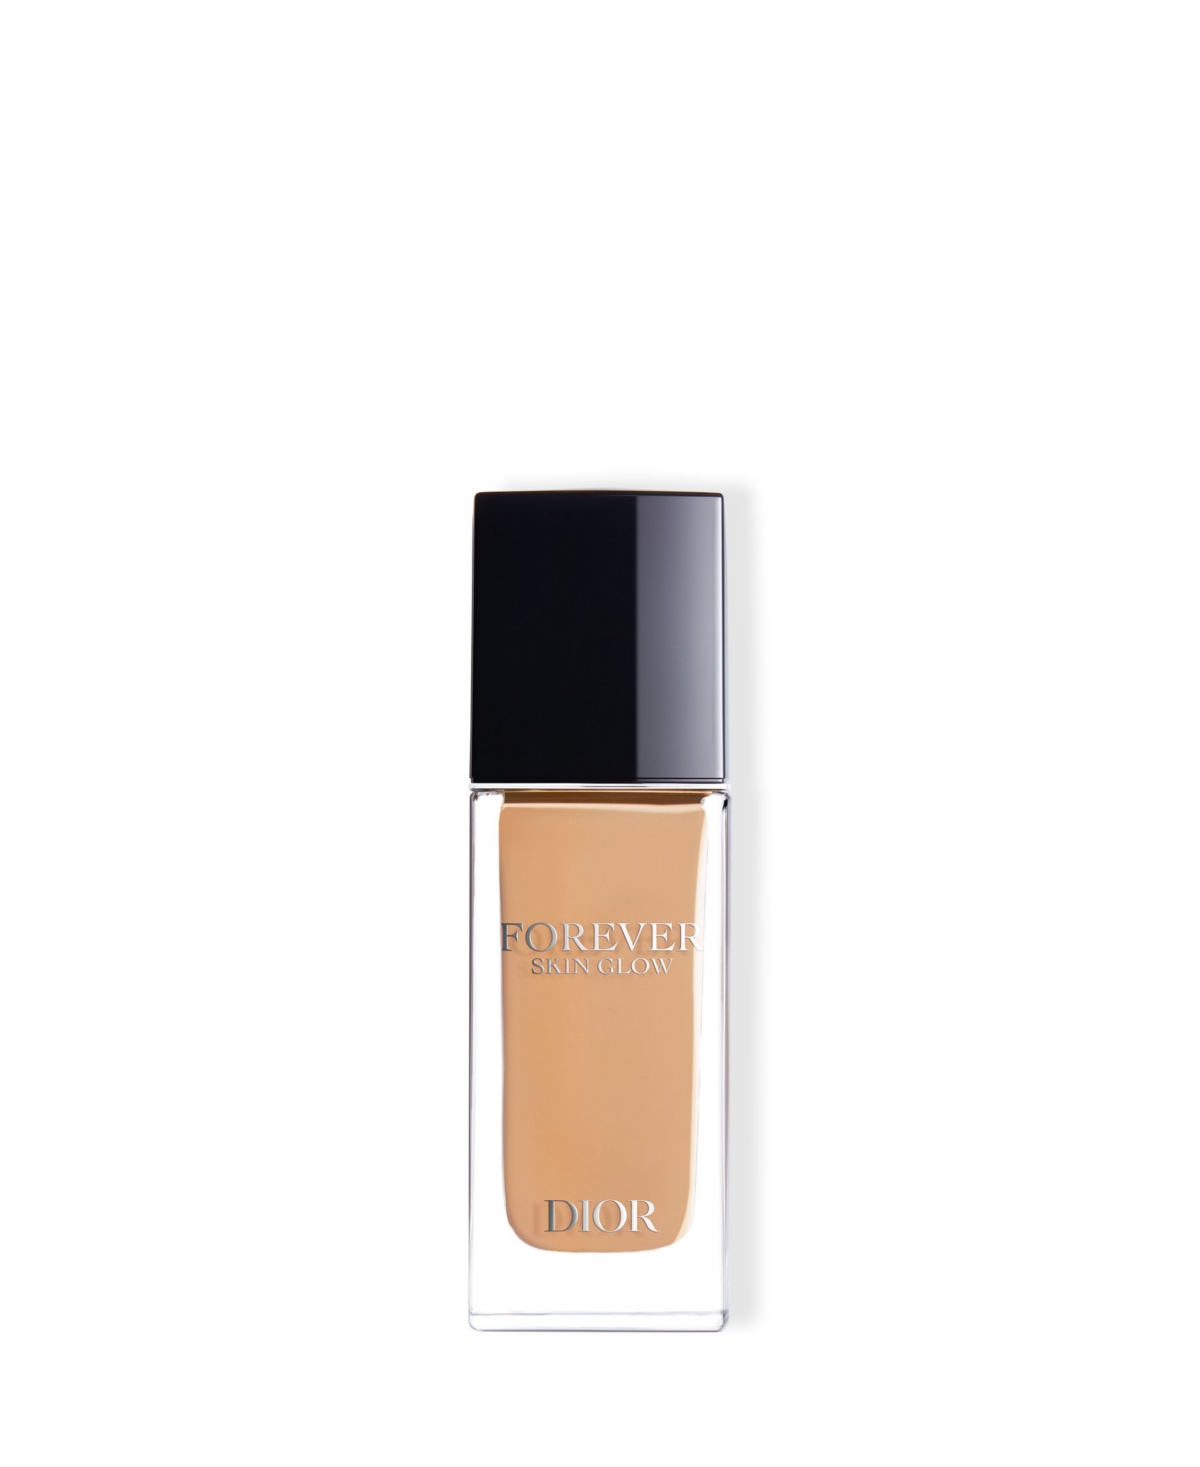 Dior Forever Skin Glow Hydrating Foundation Spf 15 In Warm (light Skin With Warm Undertones)